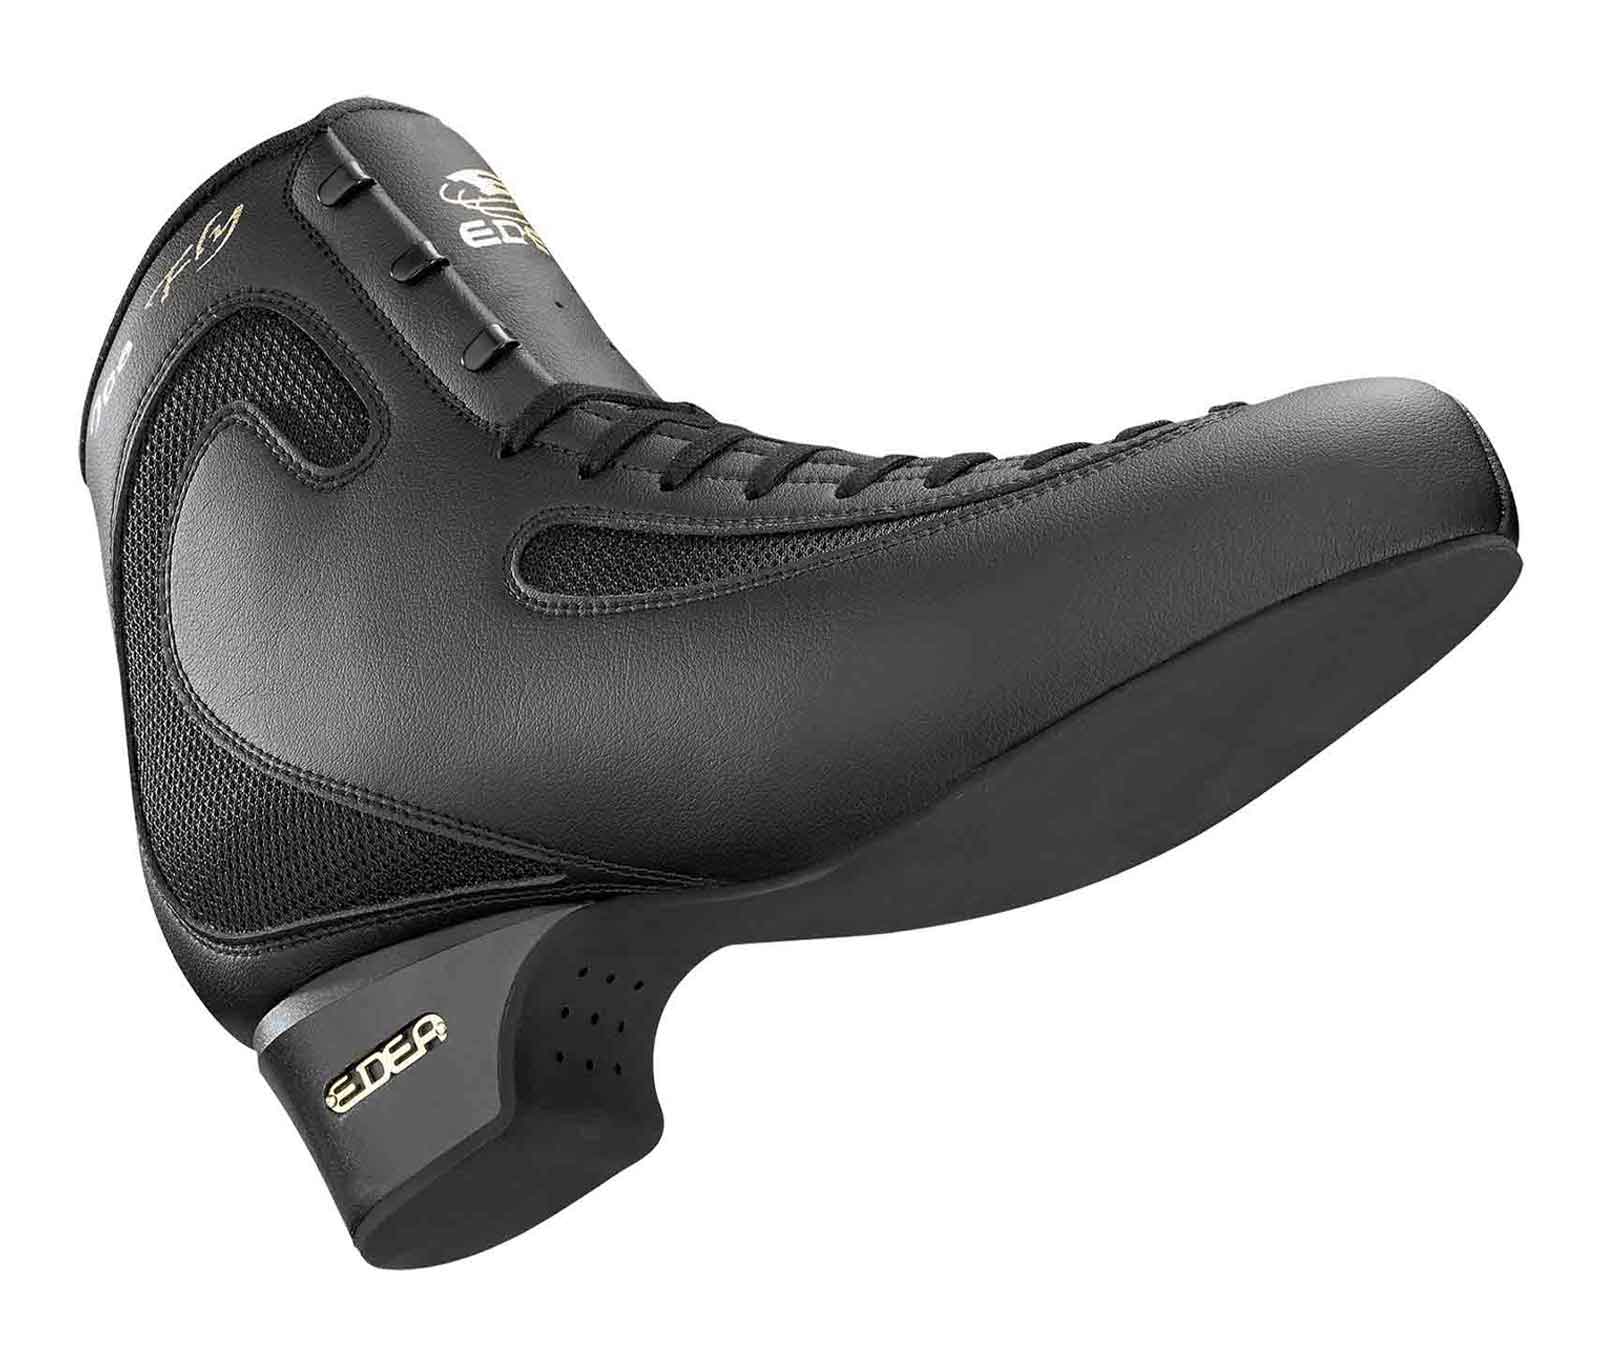 Edea Ice Fly Boot Only in Black. Junior Sizes 225 - 255